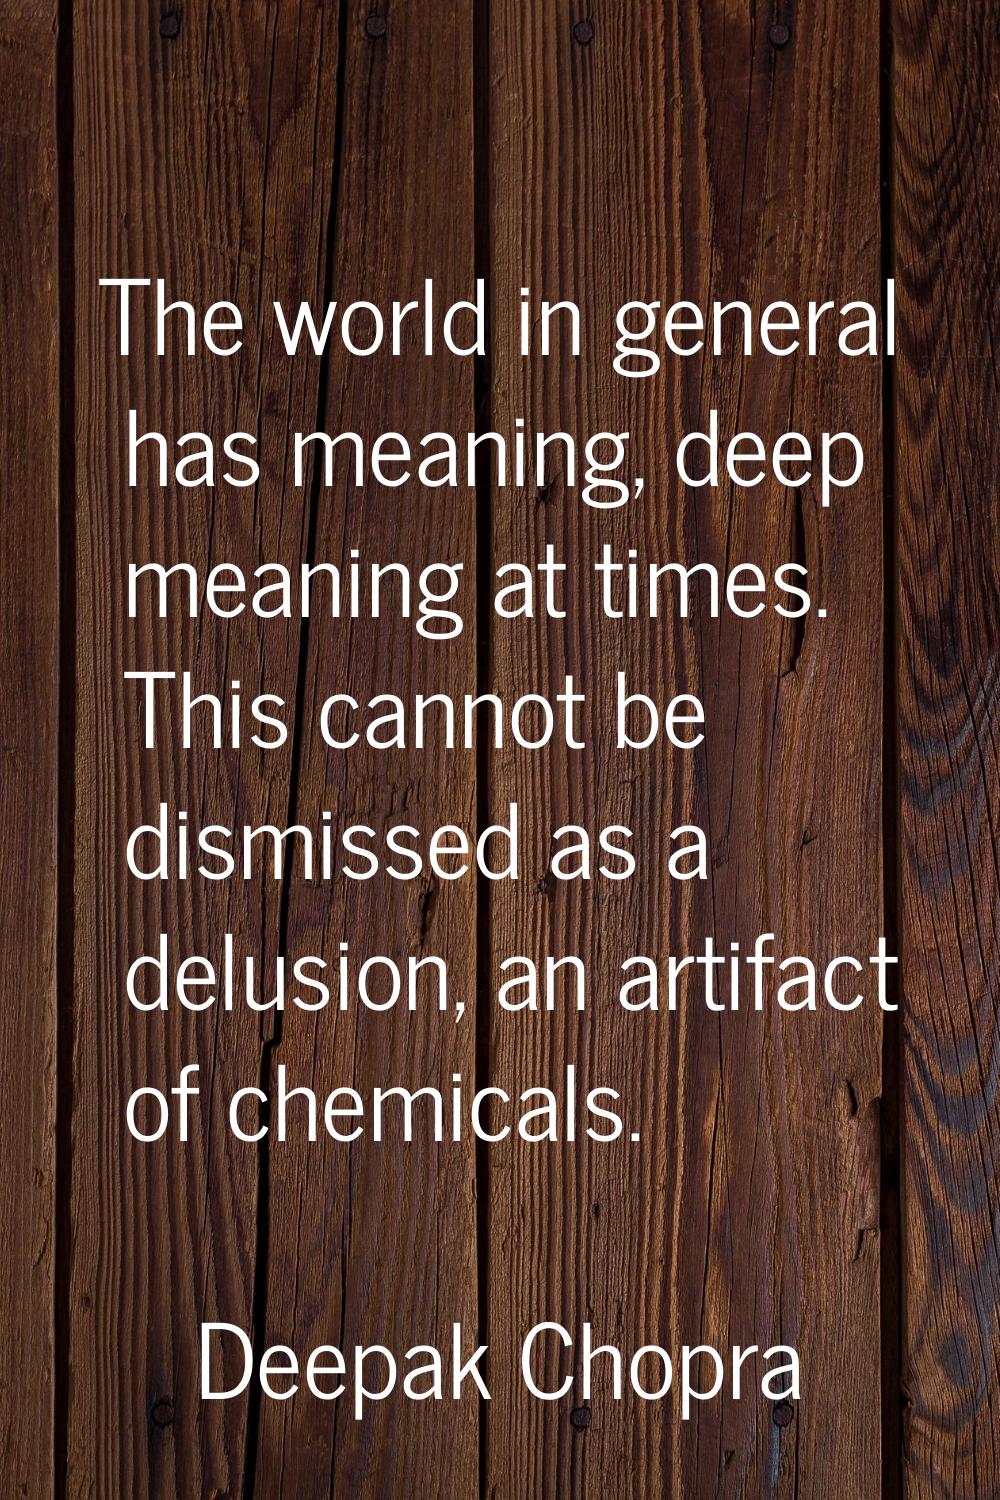 The world in general has meaning, deep meaning at times. This cannot be dismissed as a delusion, an